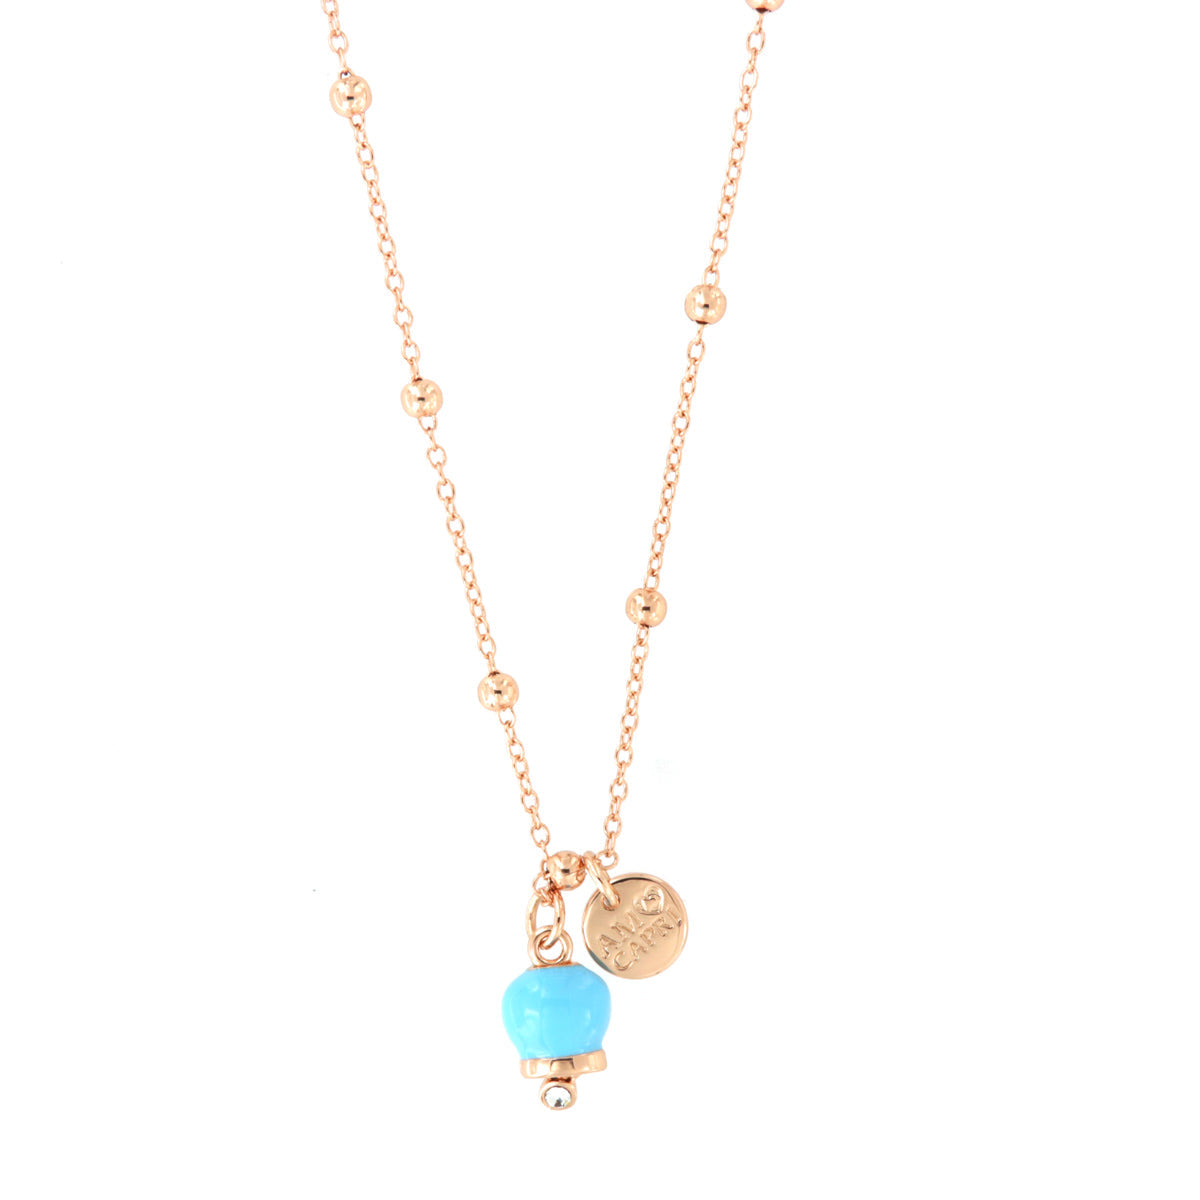 Metal necklace with pendant lucky charm, embellished with turquoise enamel and crystals